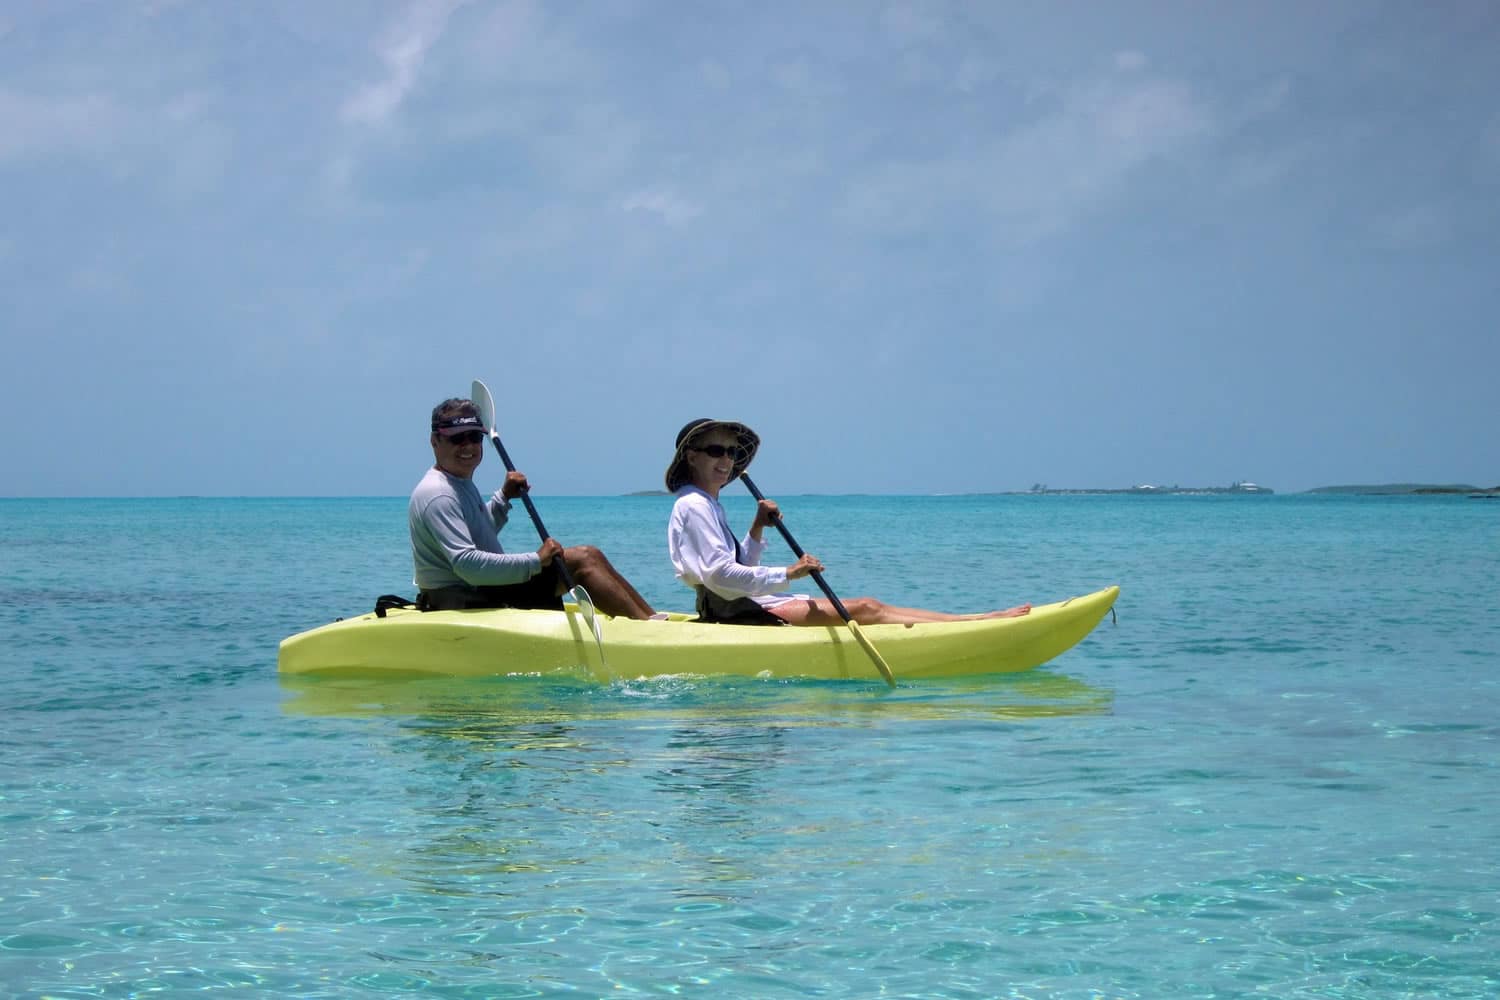 Two people paddling a yellow kayak in the clear blue water near Staniel Cay in The Bahamas.